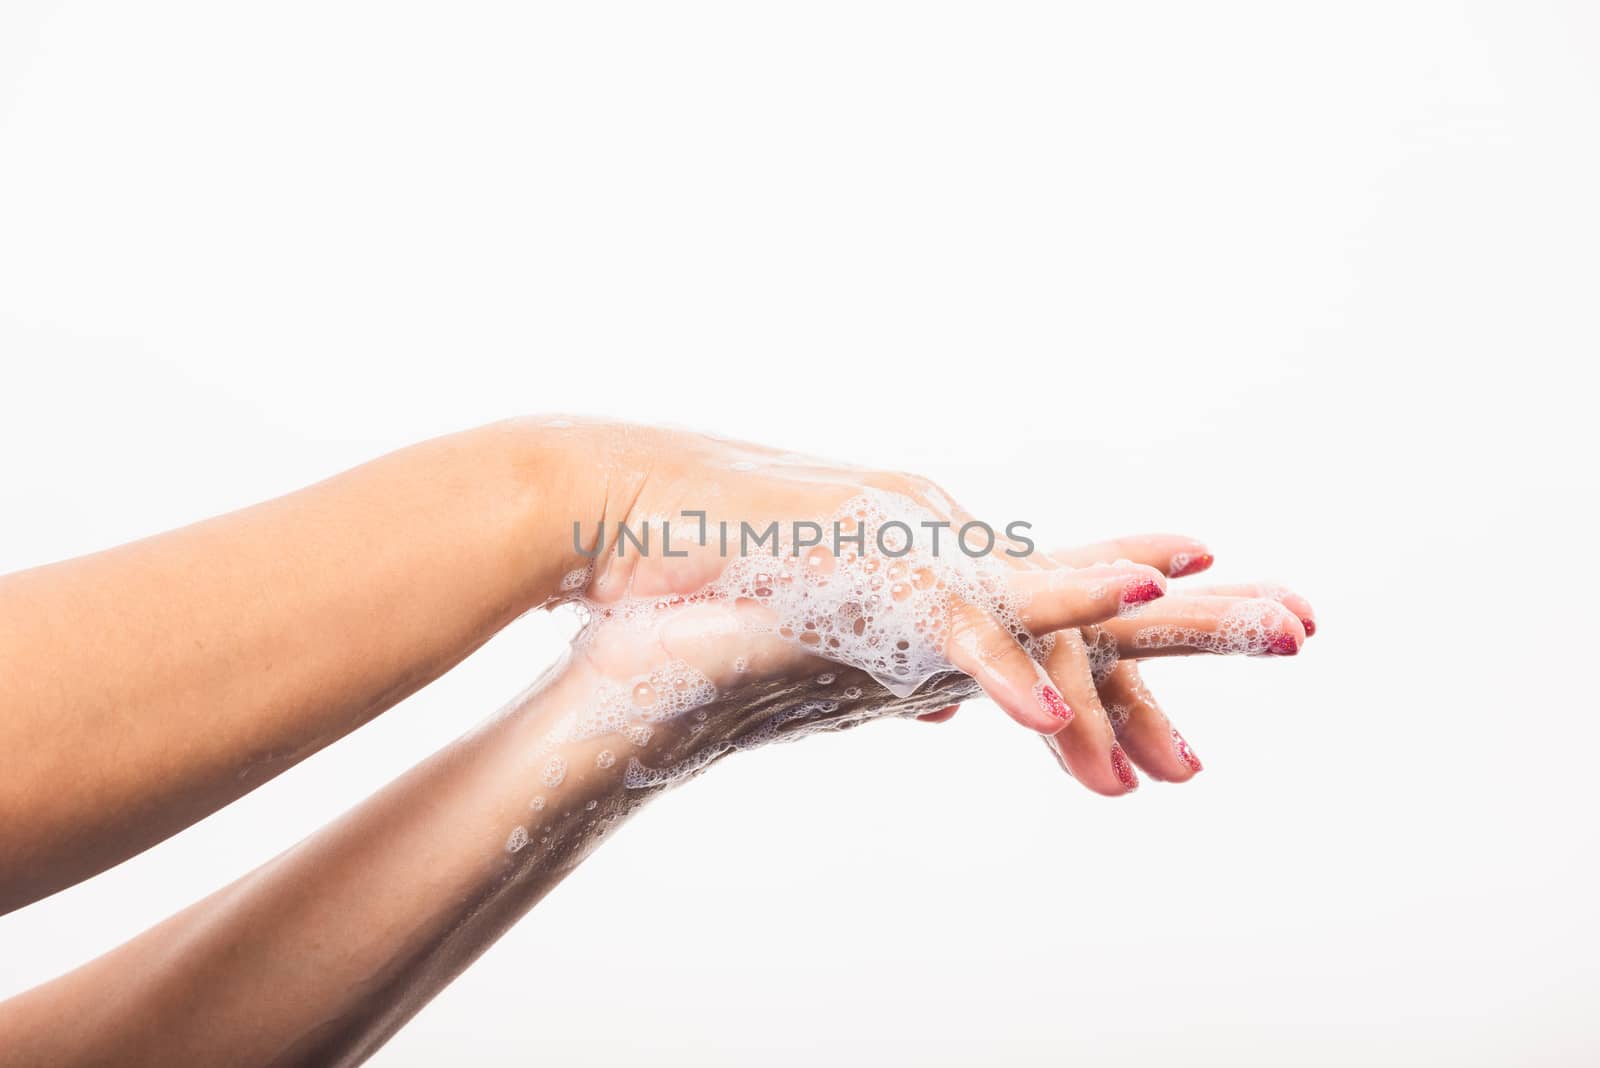 Woman washing hands by soap for cleanliness by Sorapop